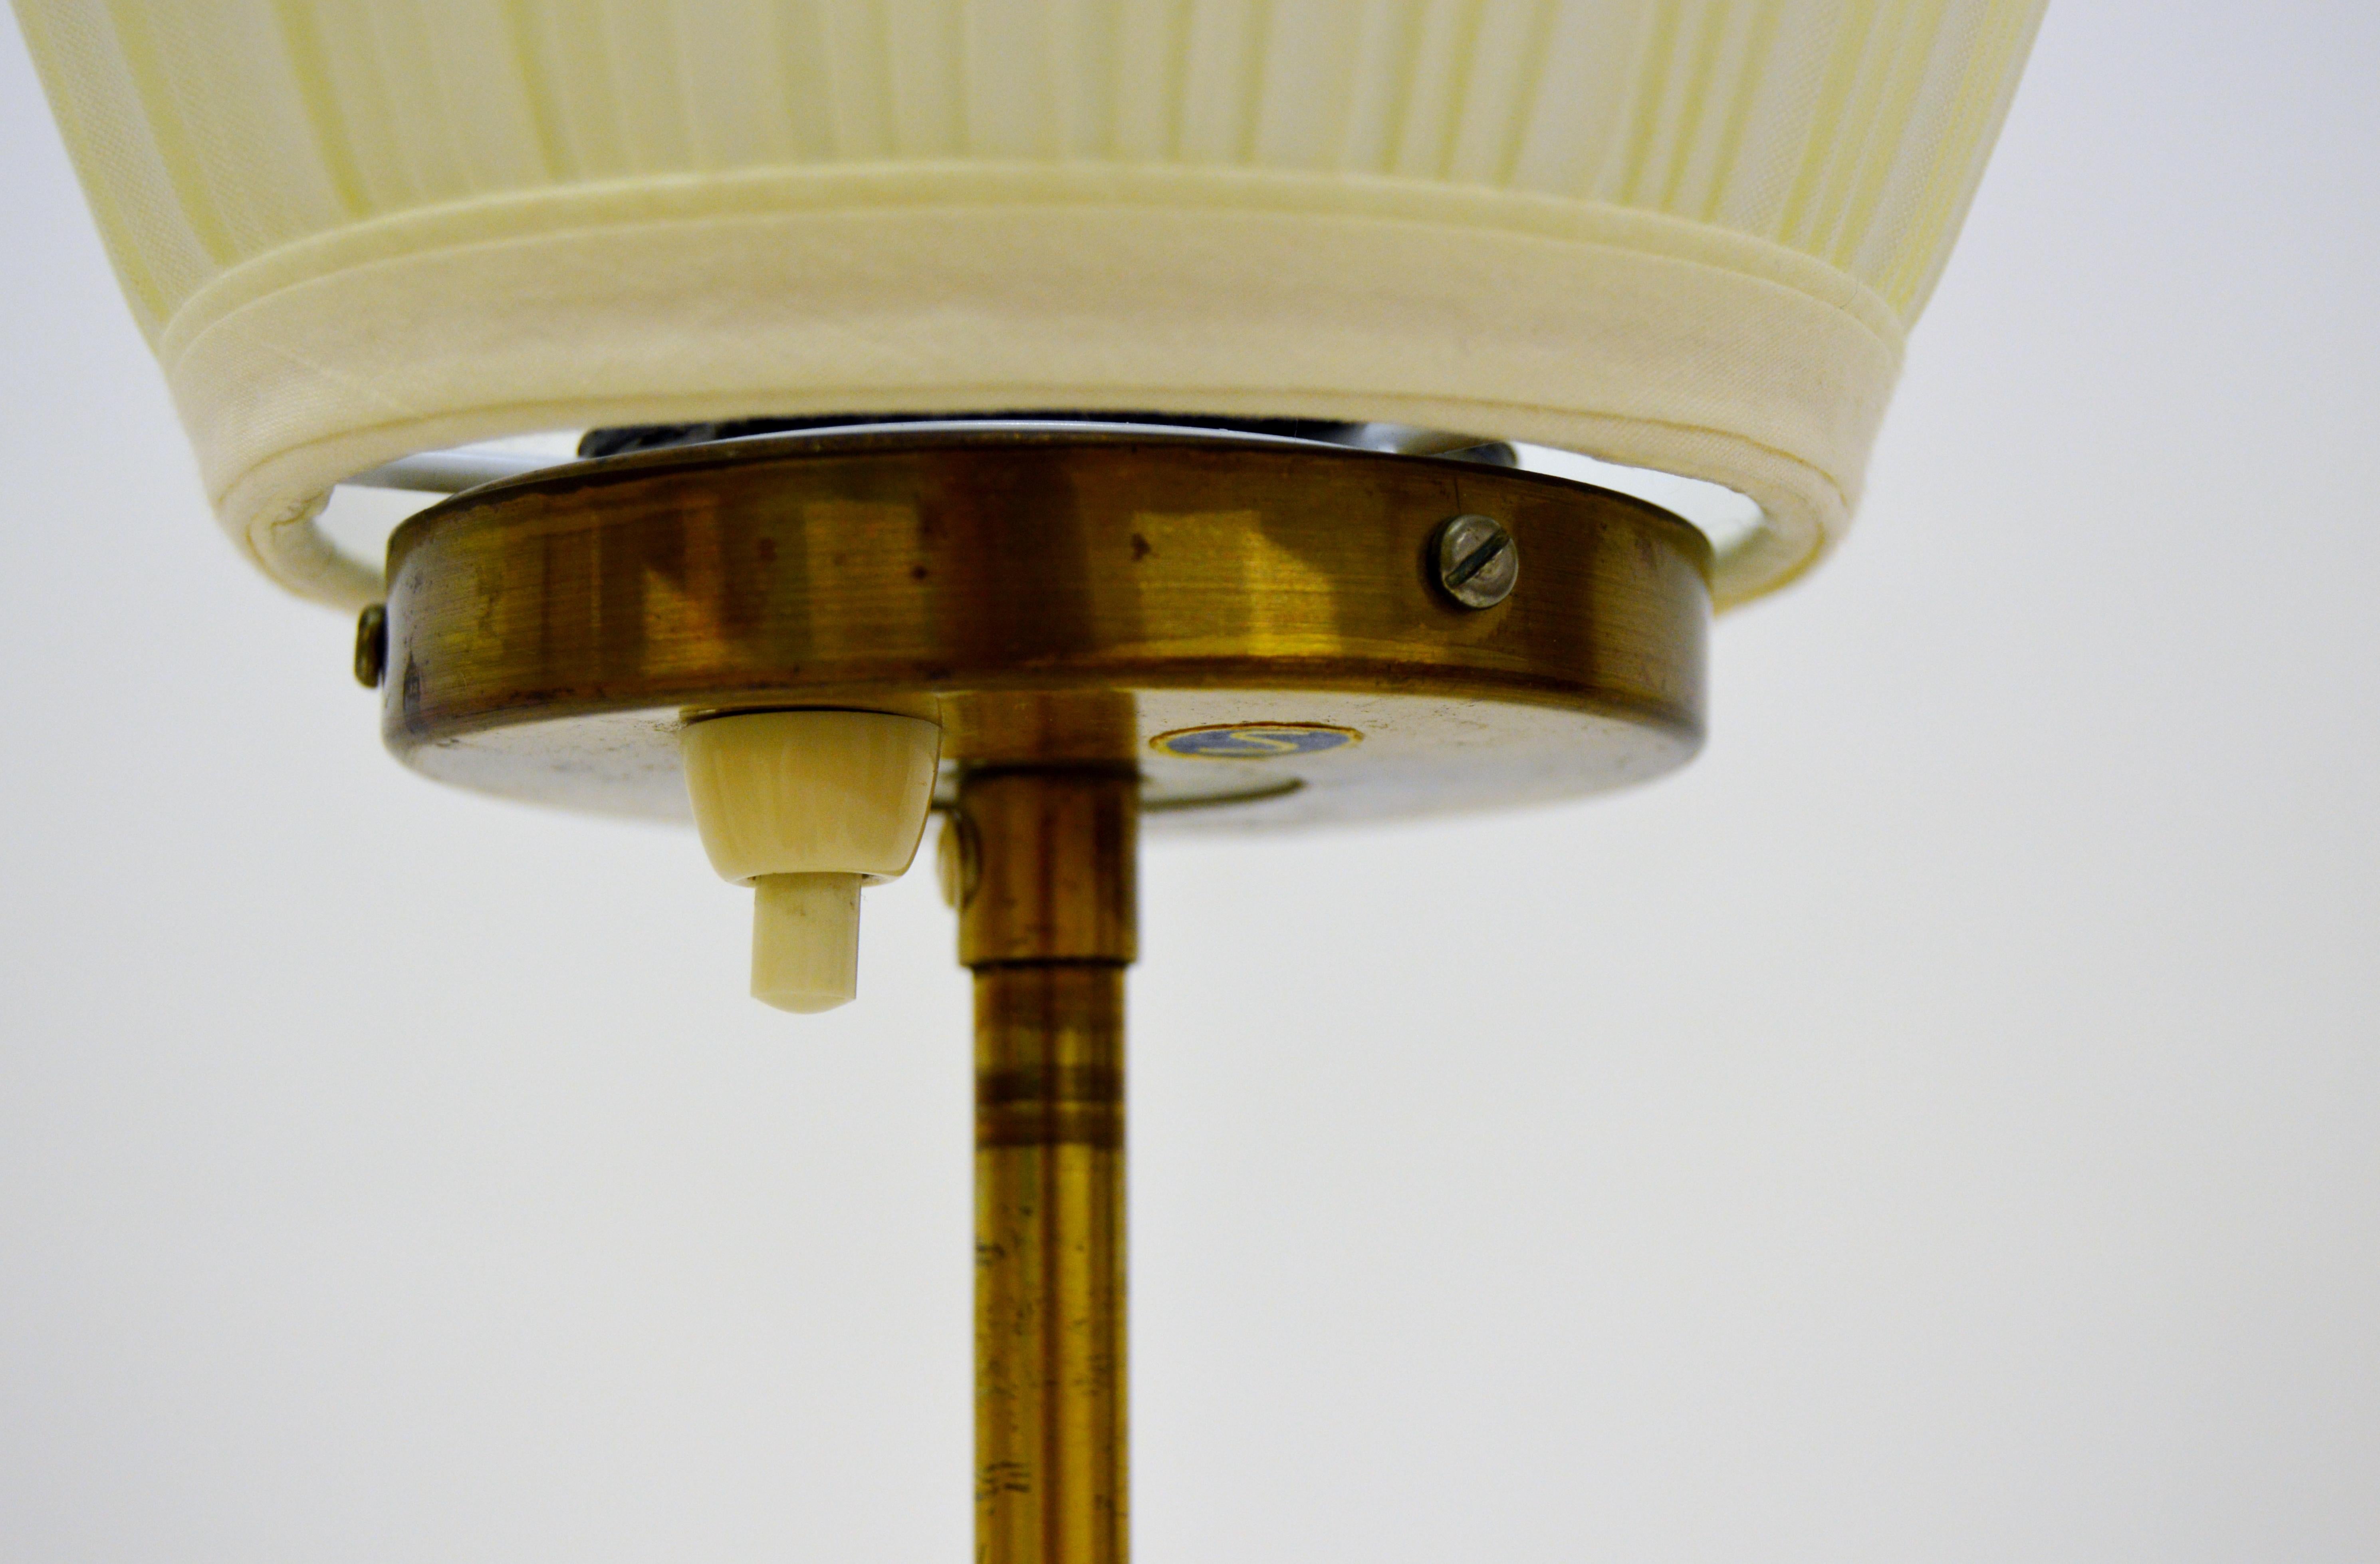 Mid-20th Century Scandinavian Modern Adjustable Uplight with Brass Details, circa 1950s For Sale